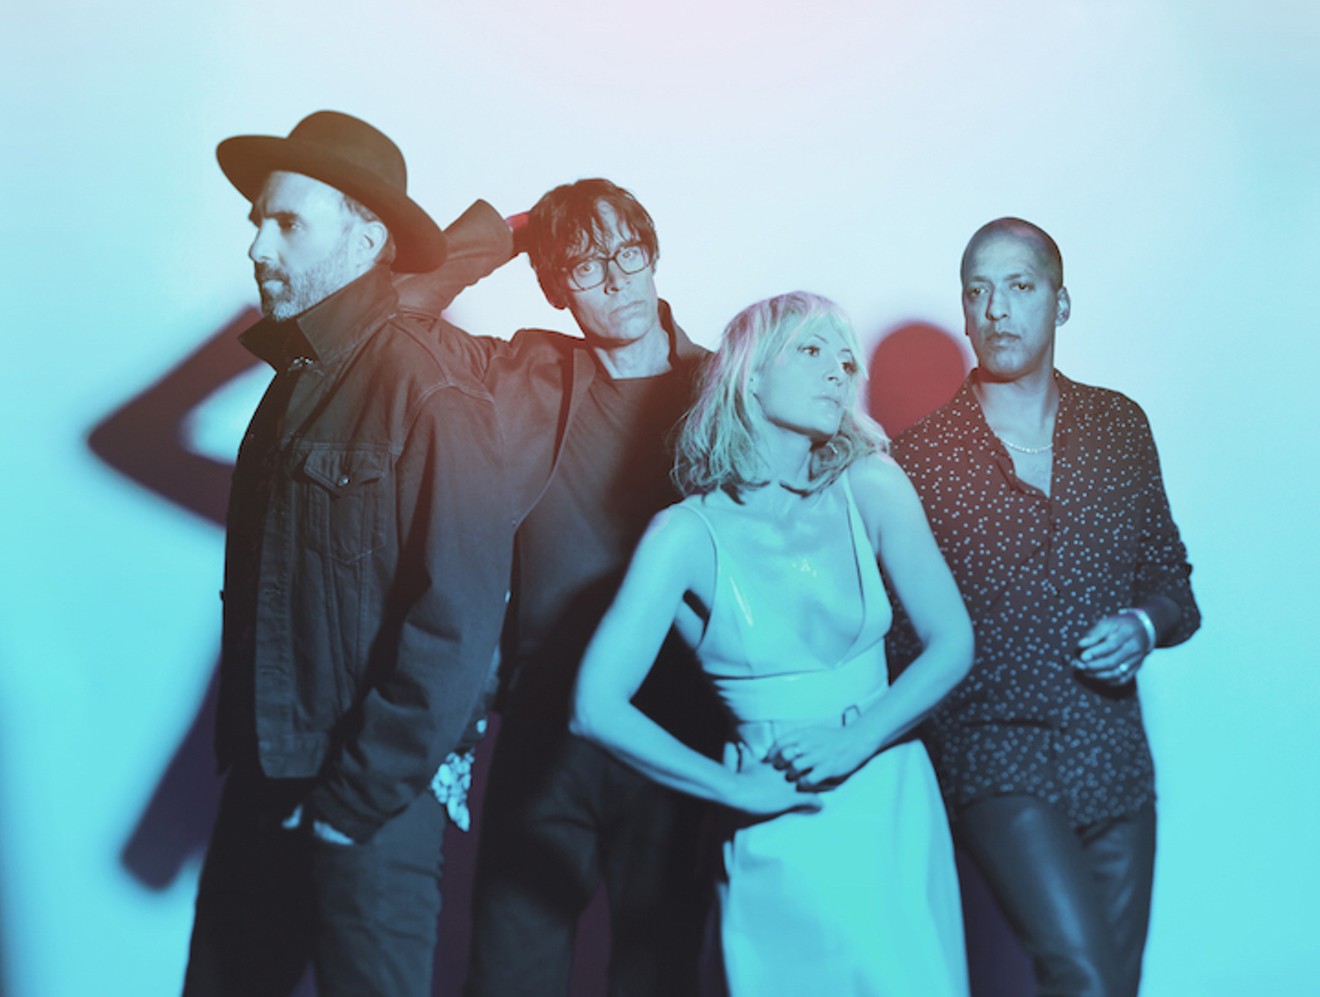 Metric plays the Fillmore on Saturday, October 15.